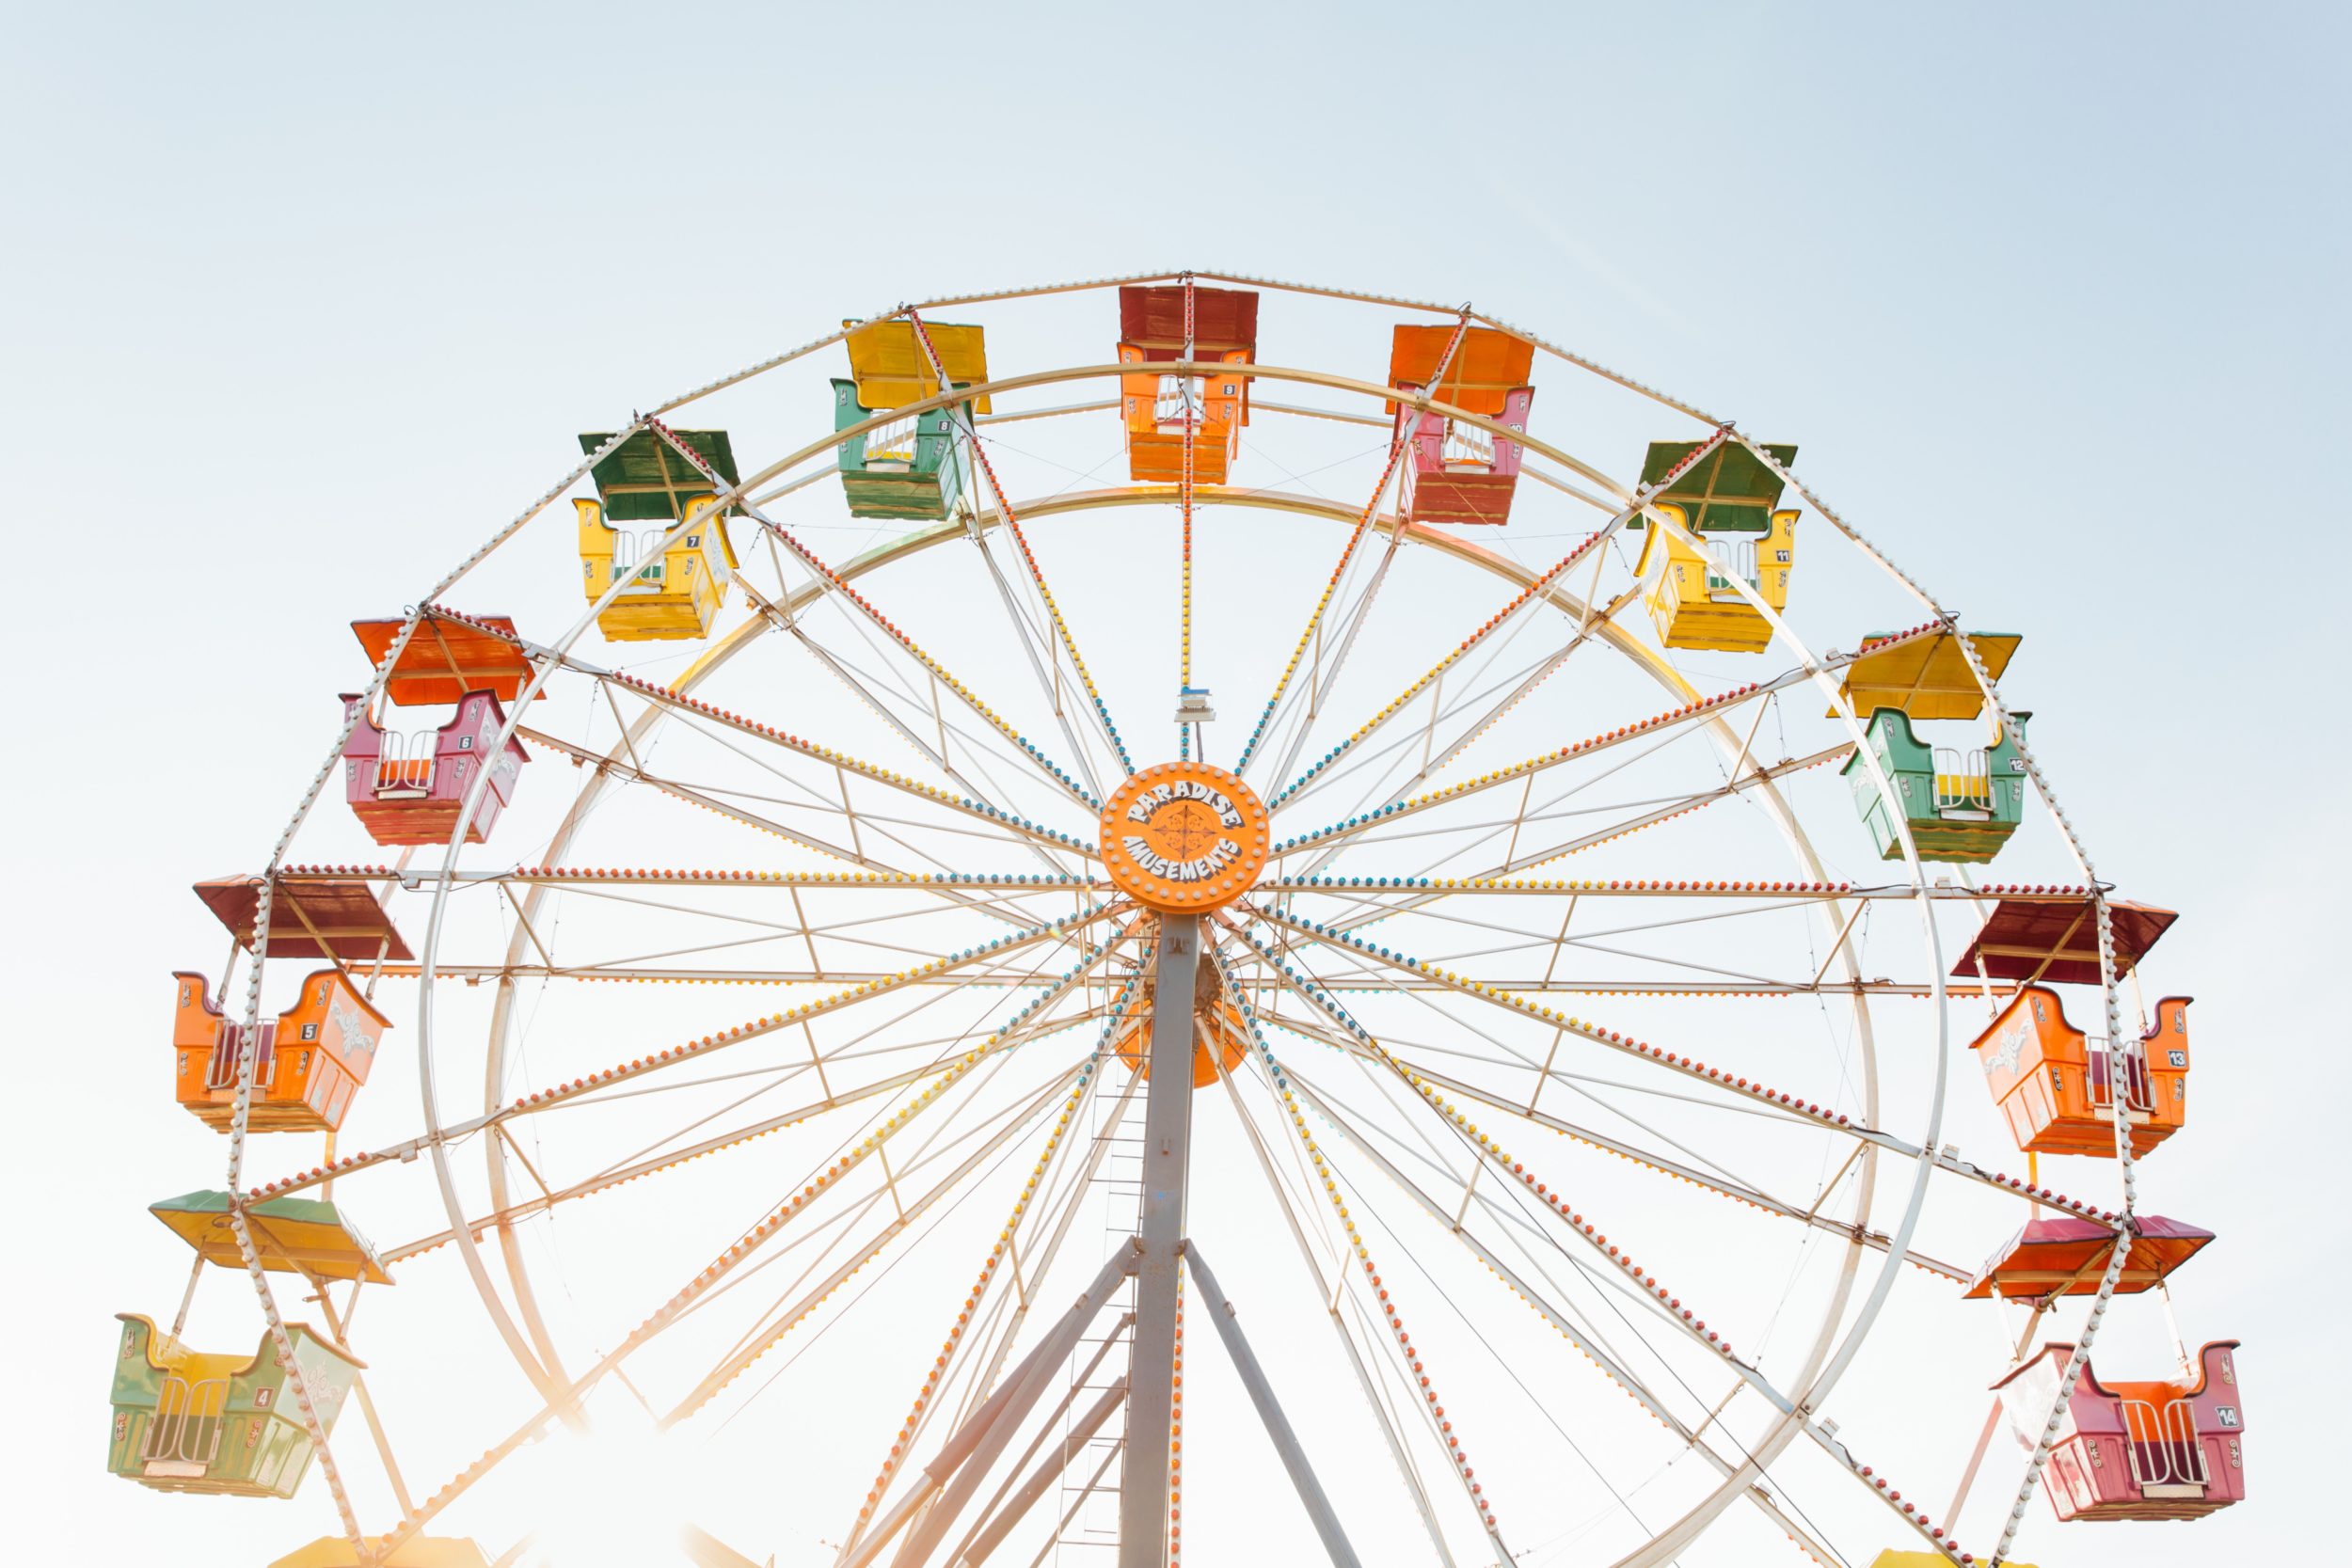 “Acres of Fun” – How To Get The Most Out Of The 2019 OC Fair